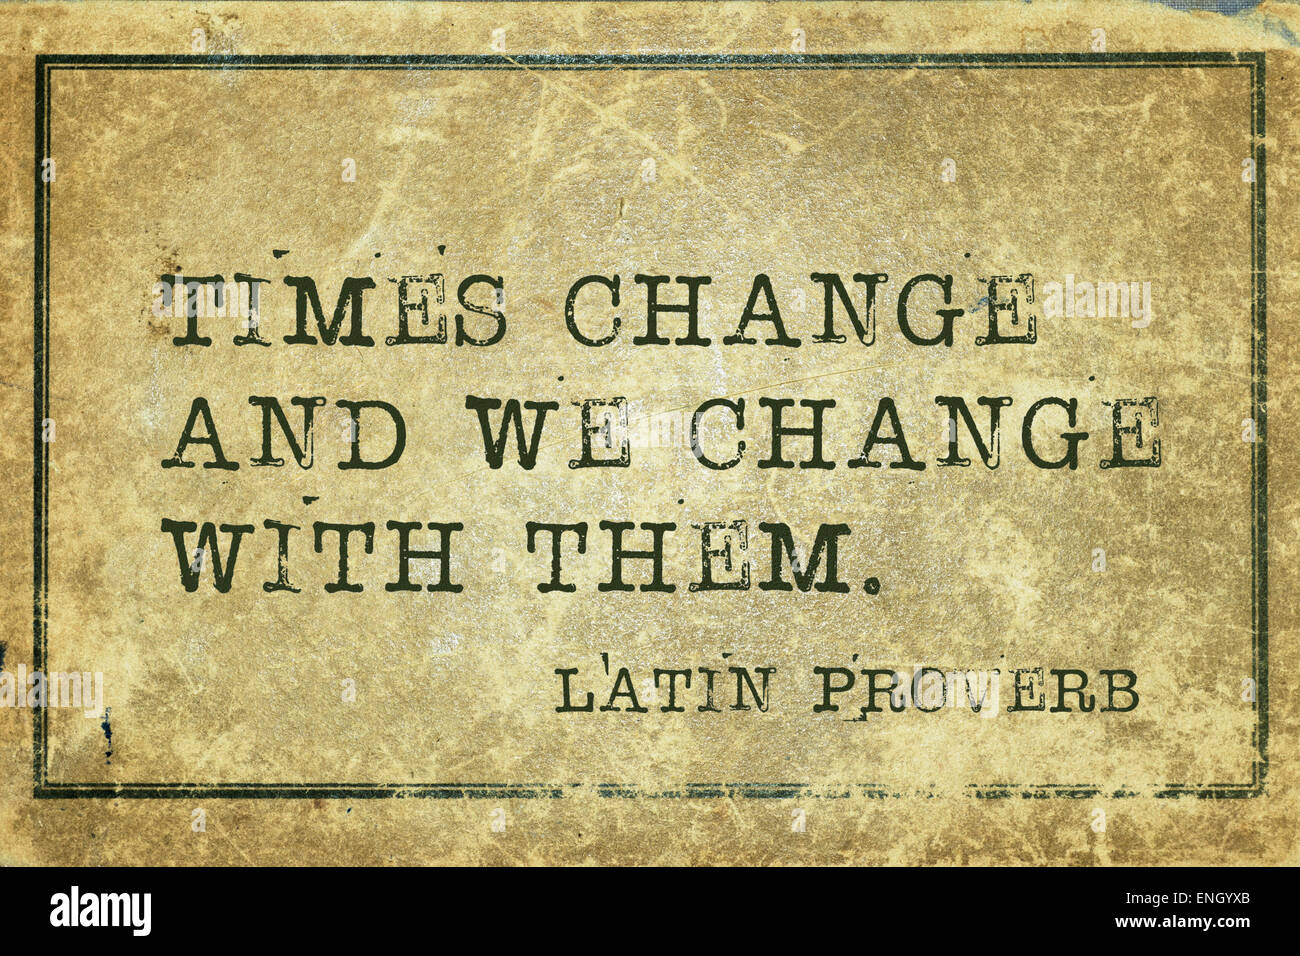 Times change and we  -  ancient Latin proverb printed on grunge vintage cardboard Stock Photo